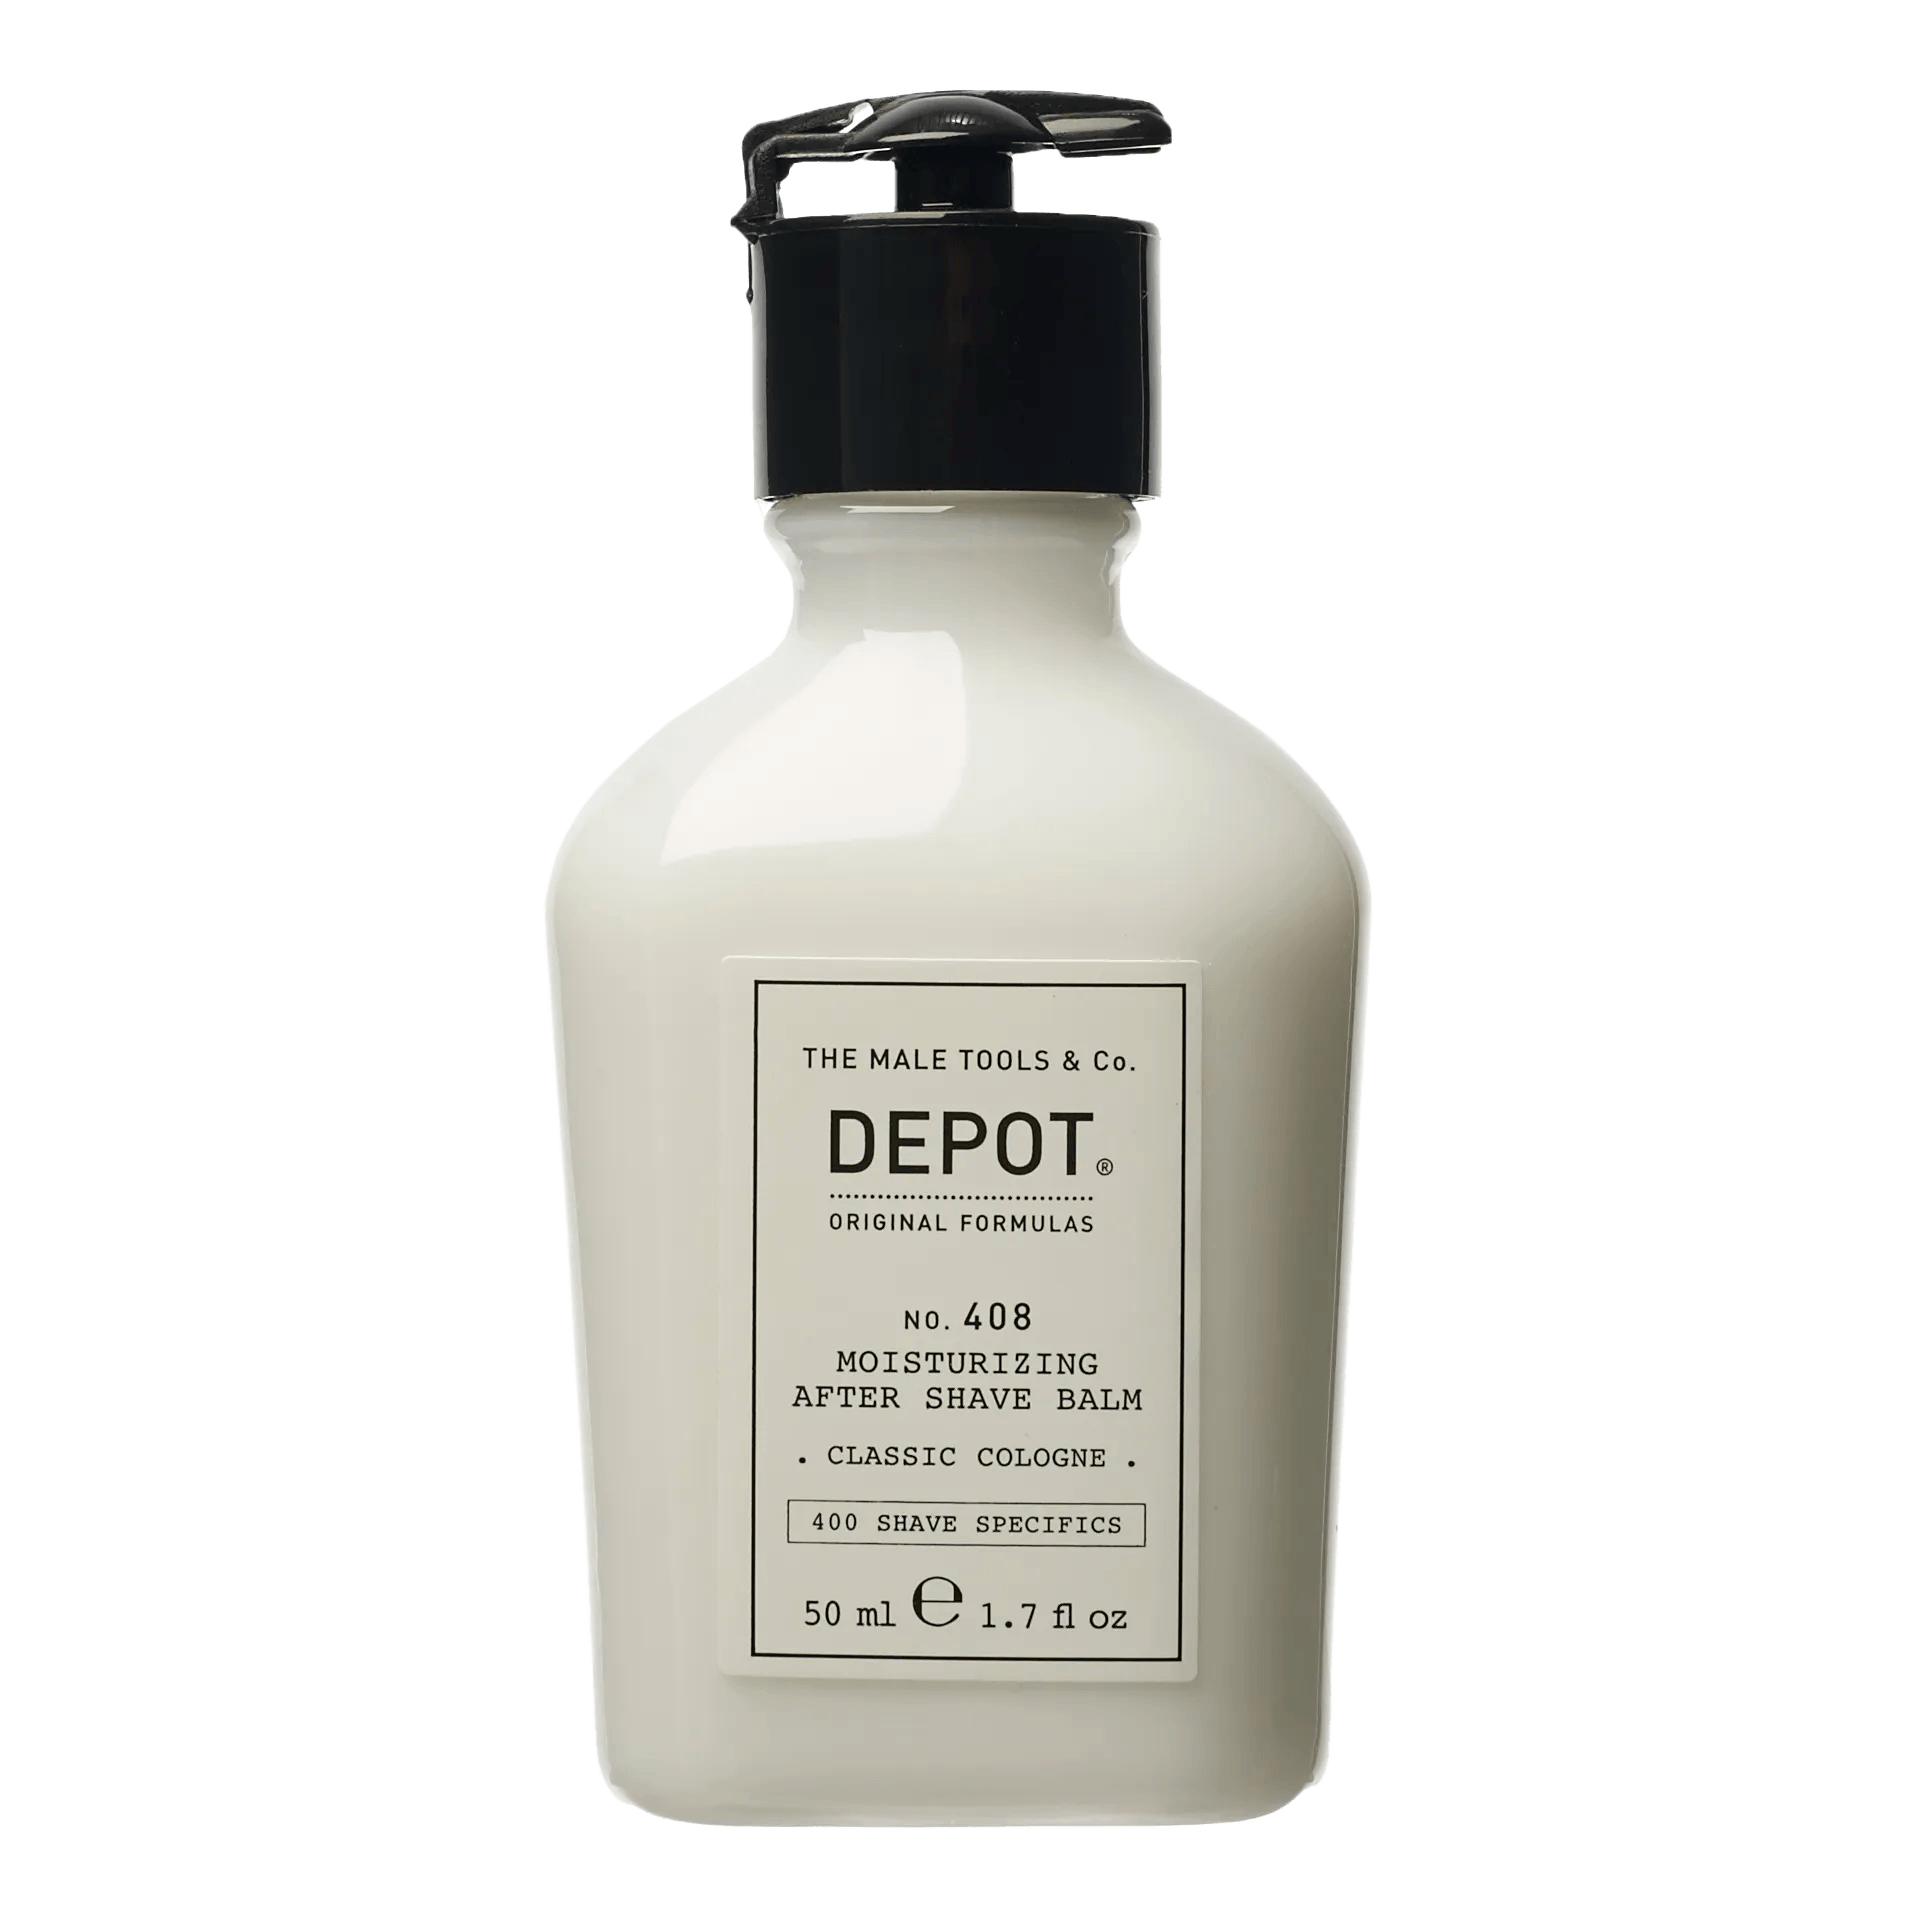 Depot No. 408 Moisturizing After Shave Balm - Classic Cologne